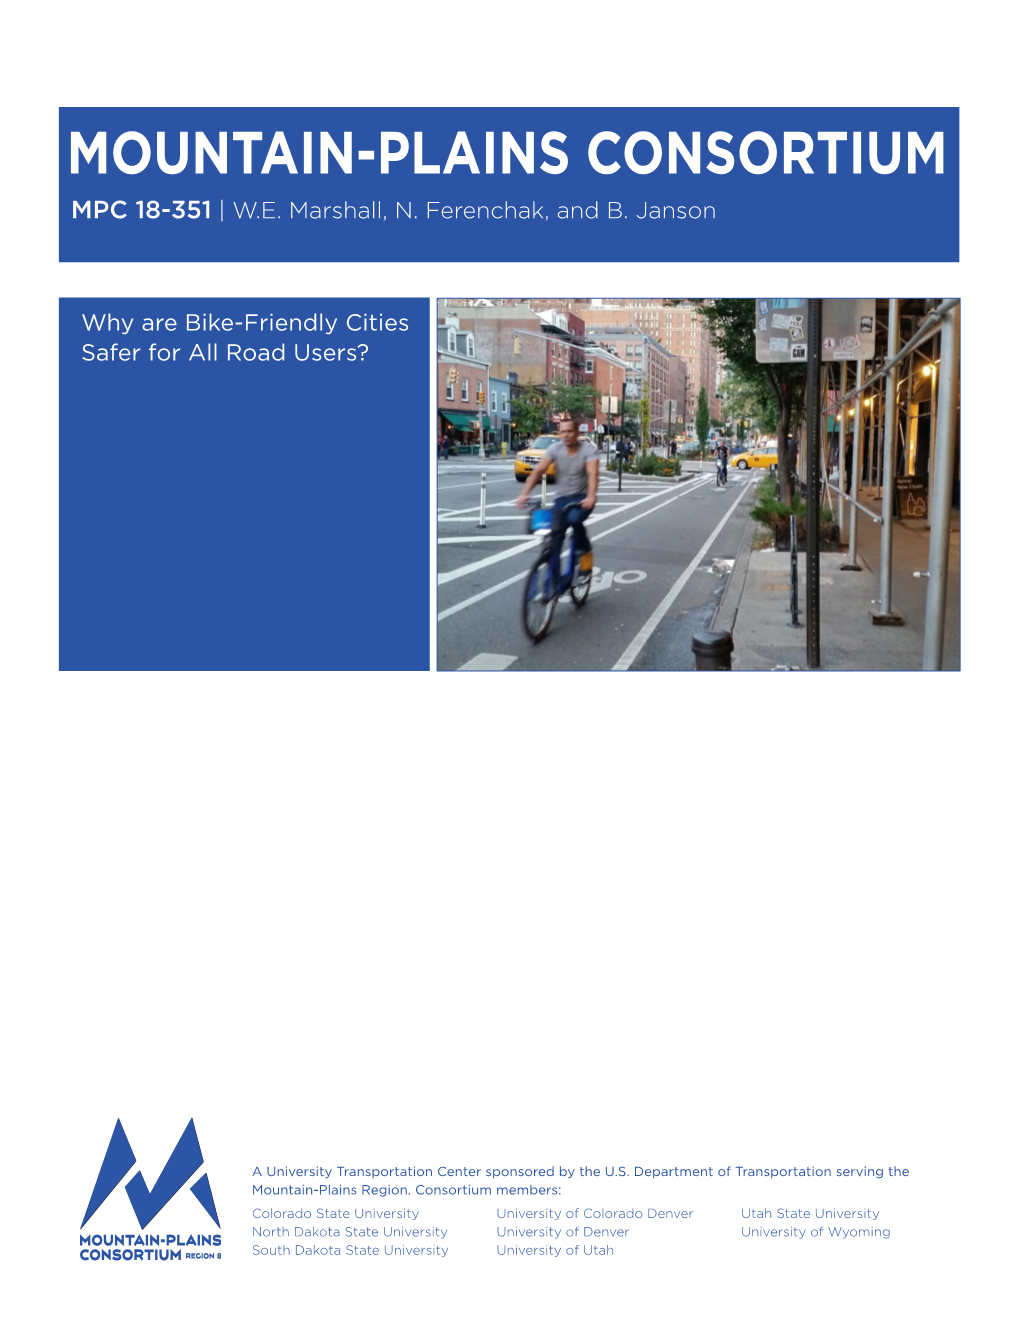 Why Are Bike-Friendly Cities Safer for All Road Users? (MPC-18-351)